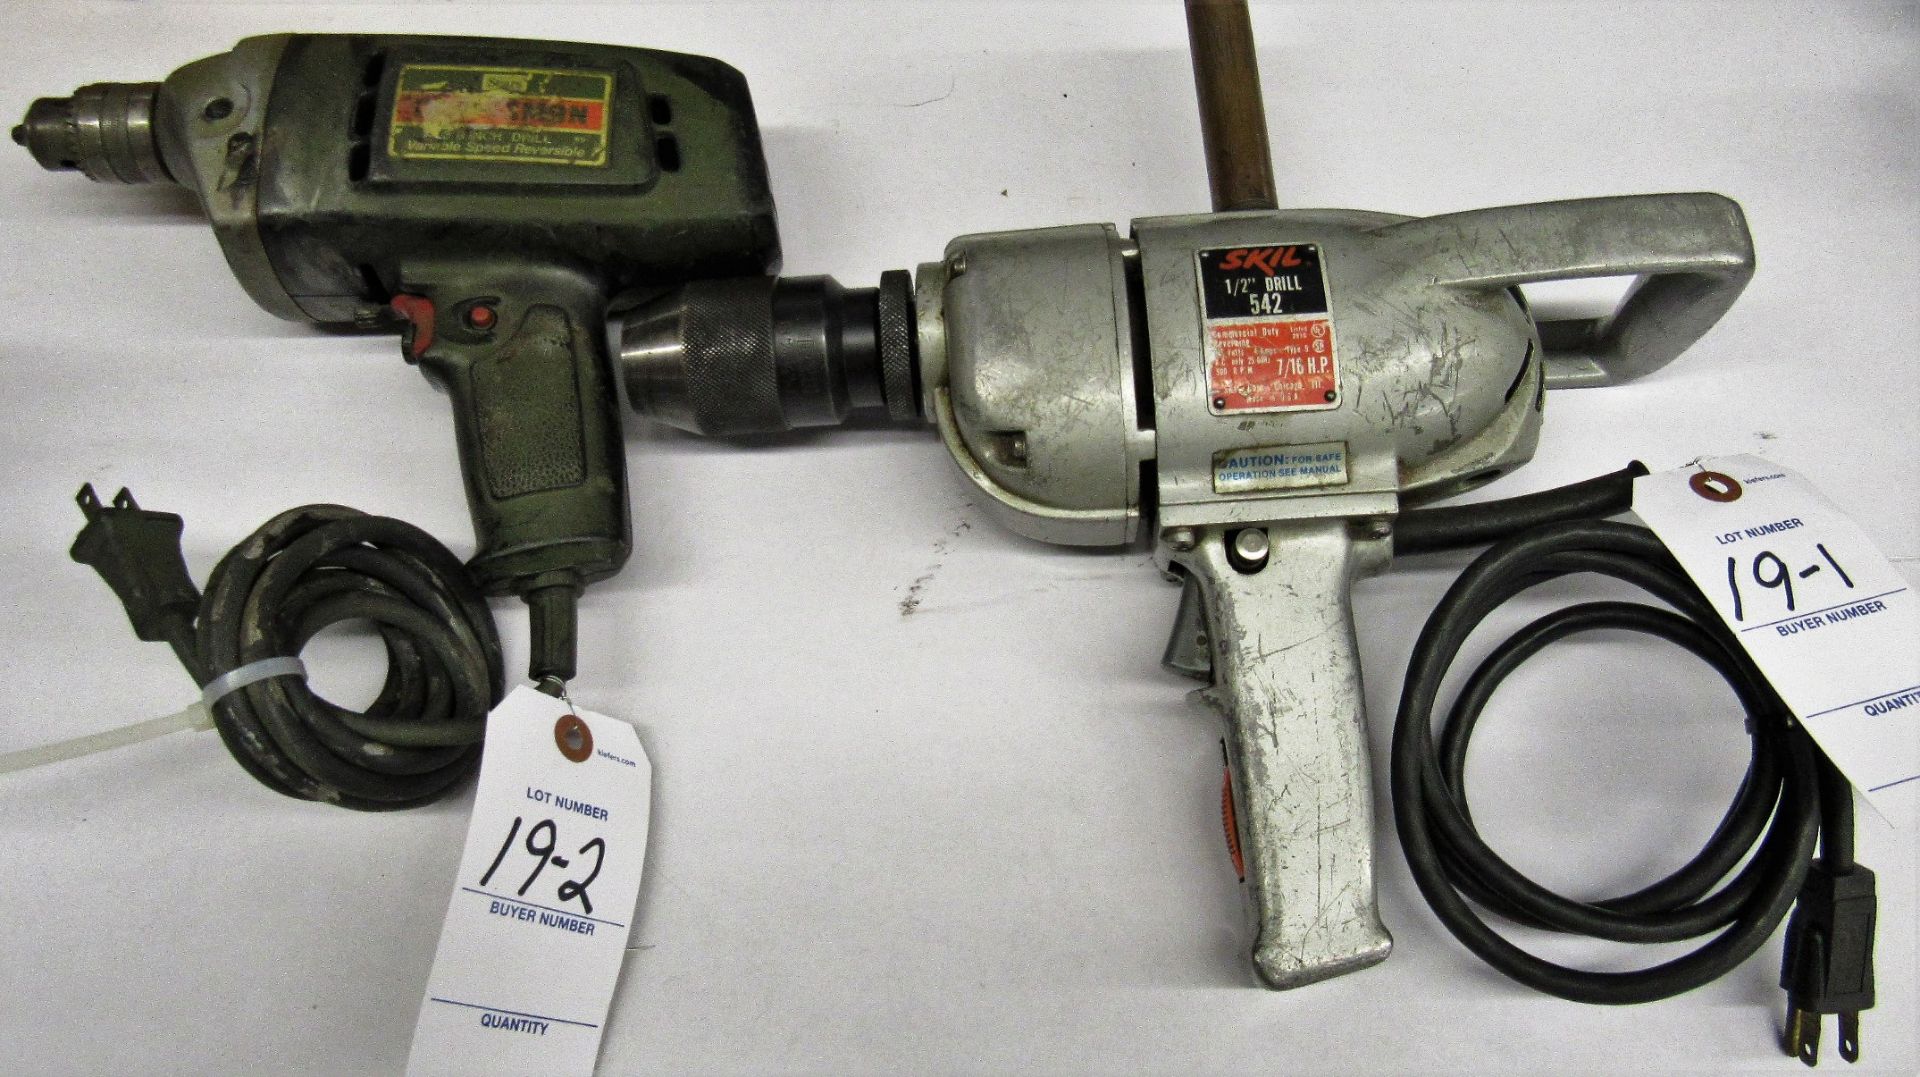 1/2" Skil Electric Hand Drill